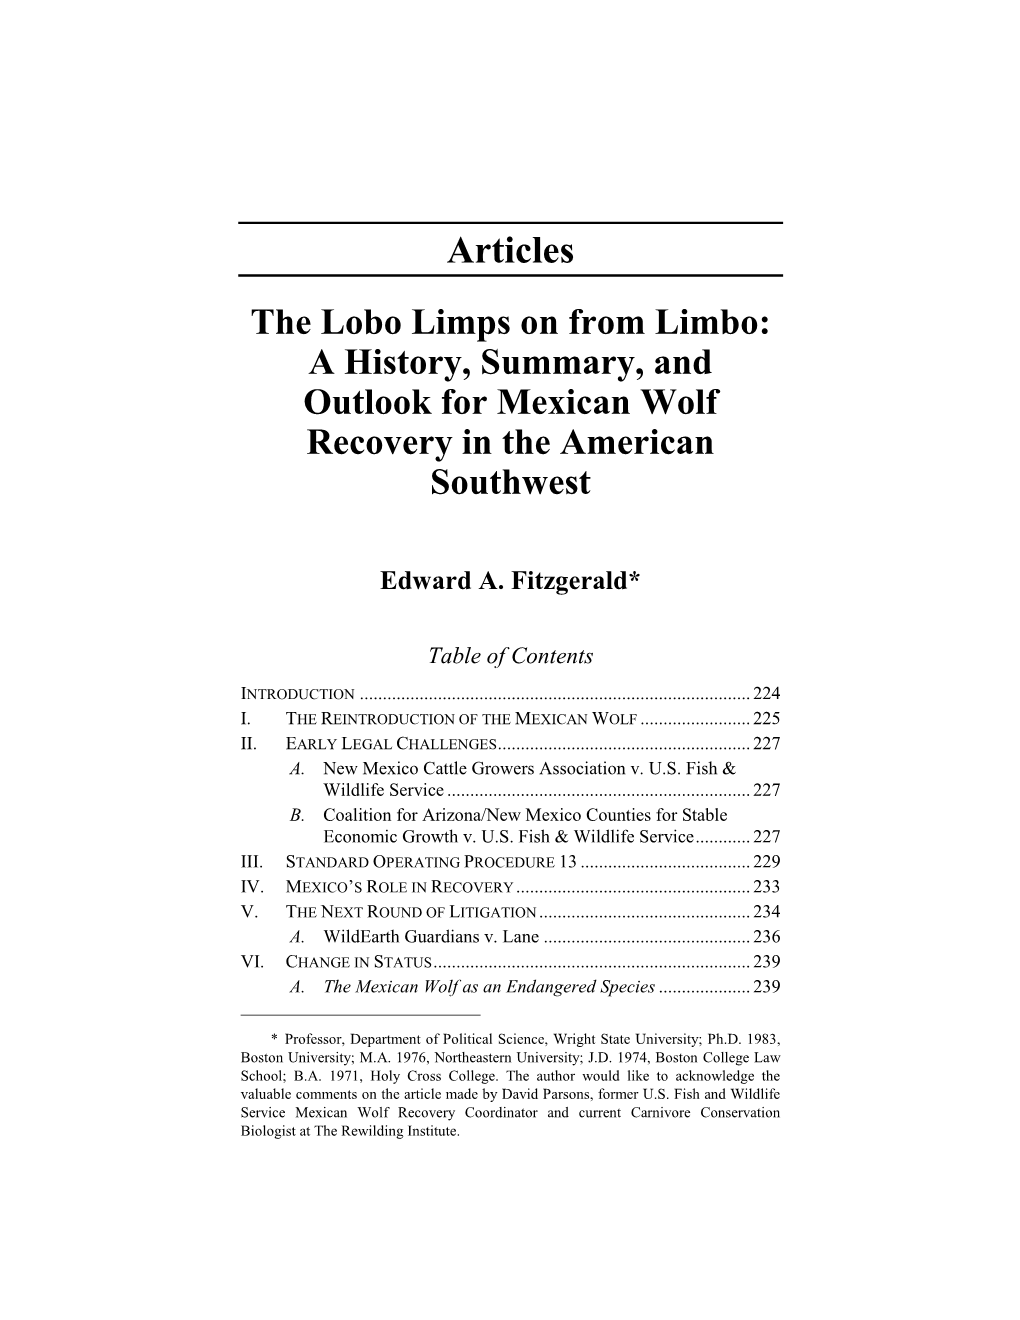 Articles the Lobo Limps on from Limbo: a History, Summary, and Outlook for Mexican Wolf Recovery in the American Southwest